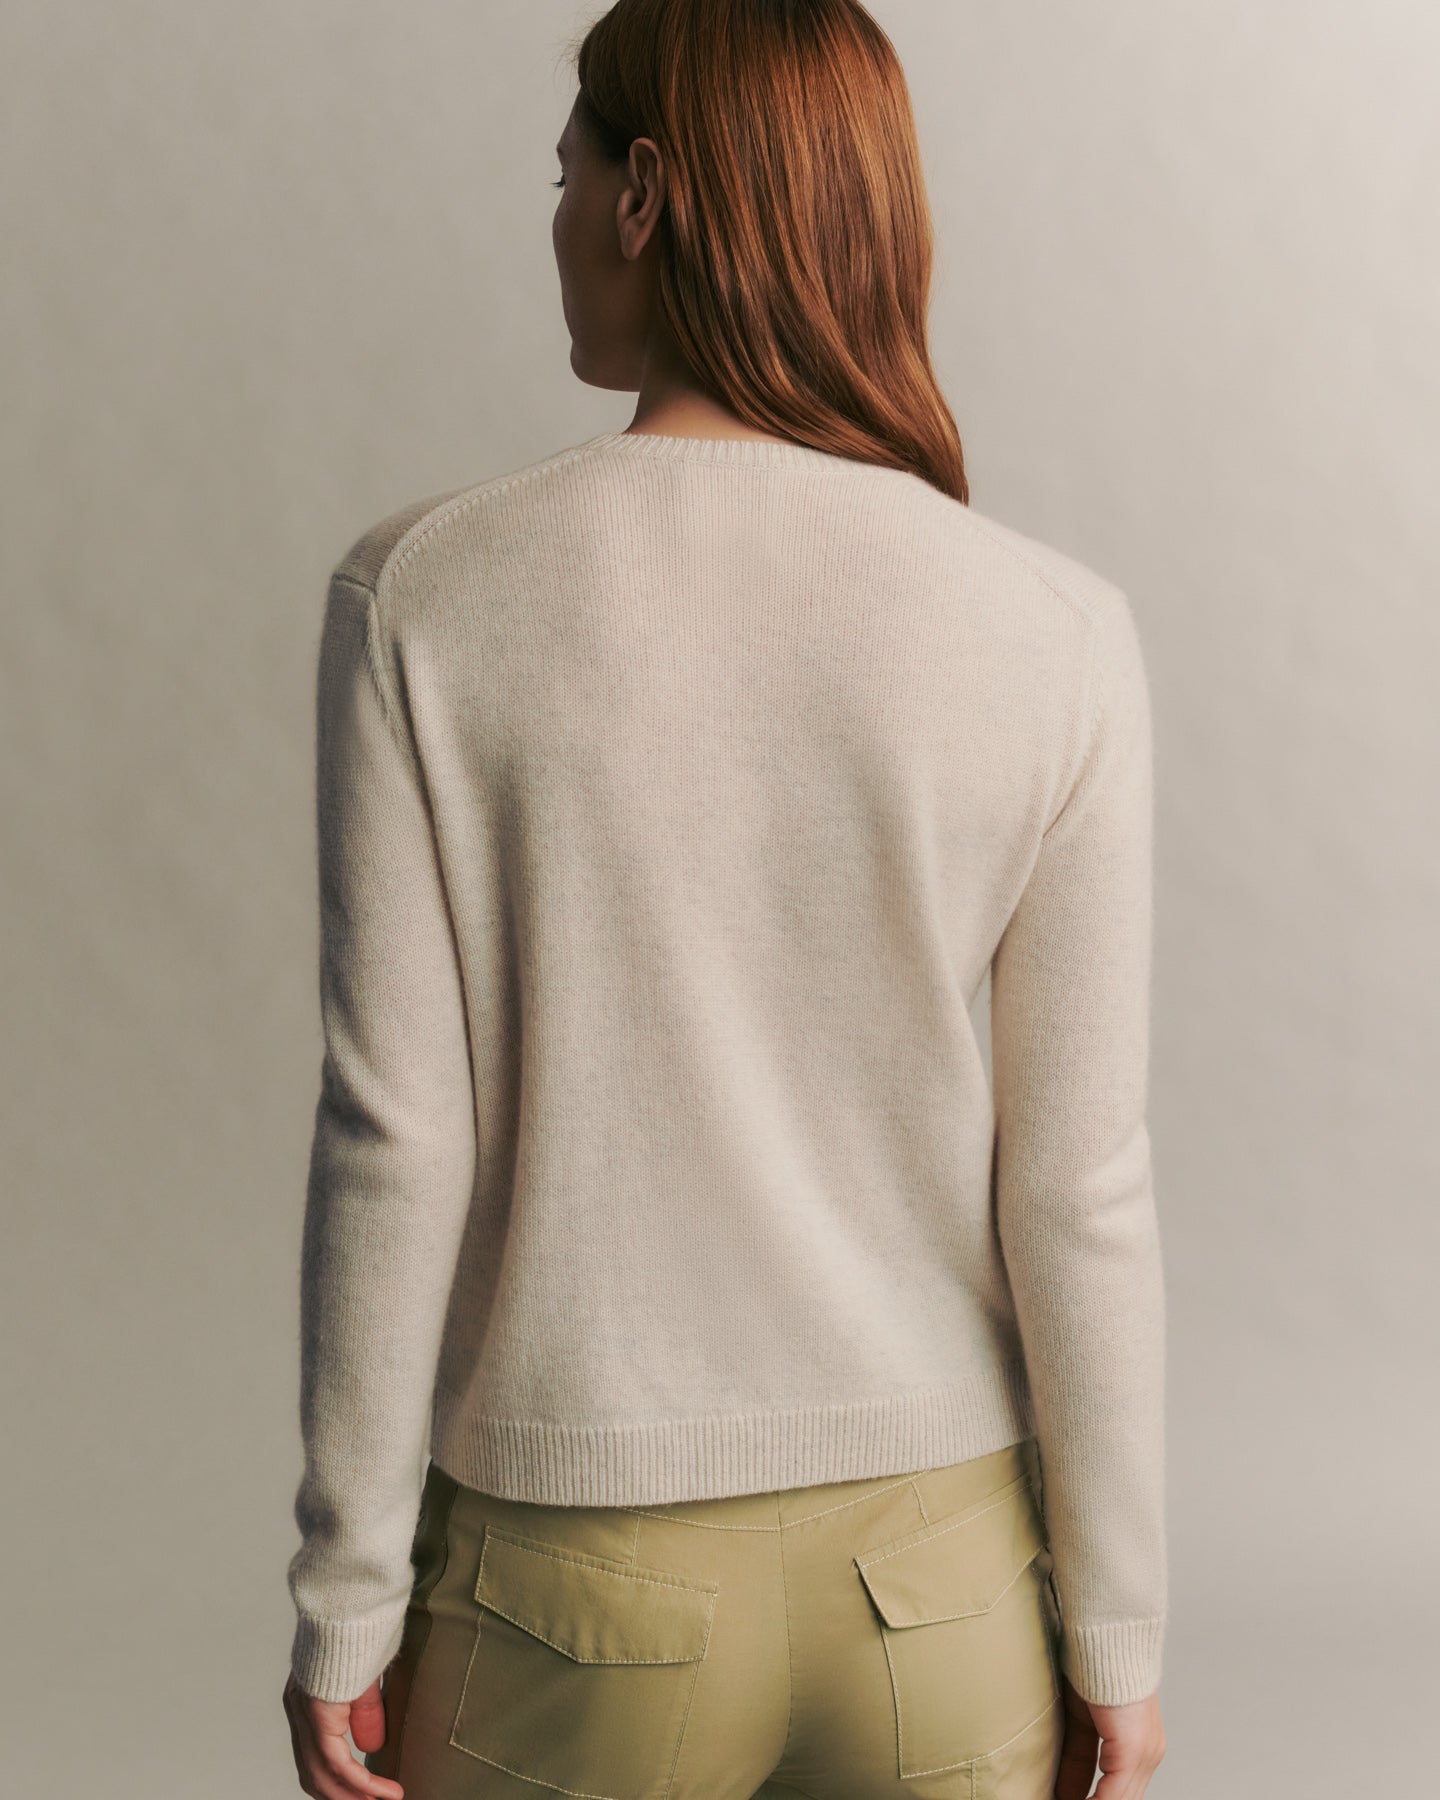 TWP White heather grey Jill Crewneck Sweater in cashmere view 5